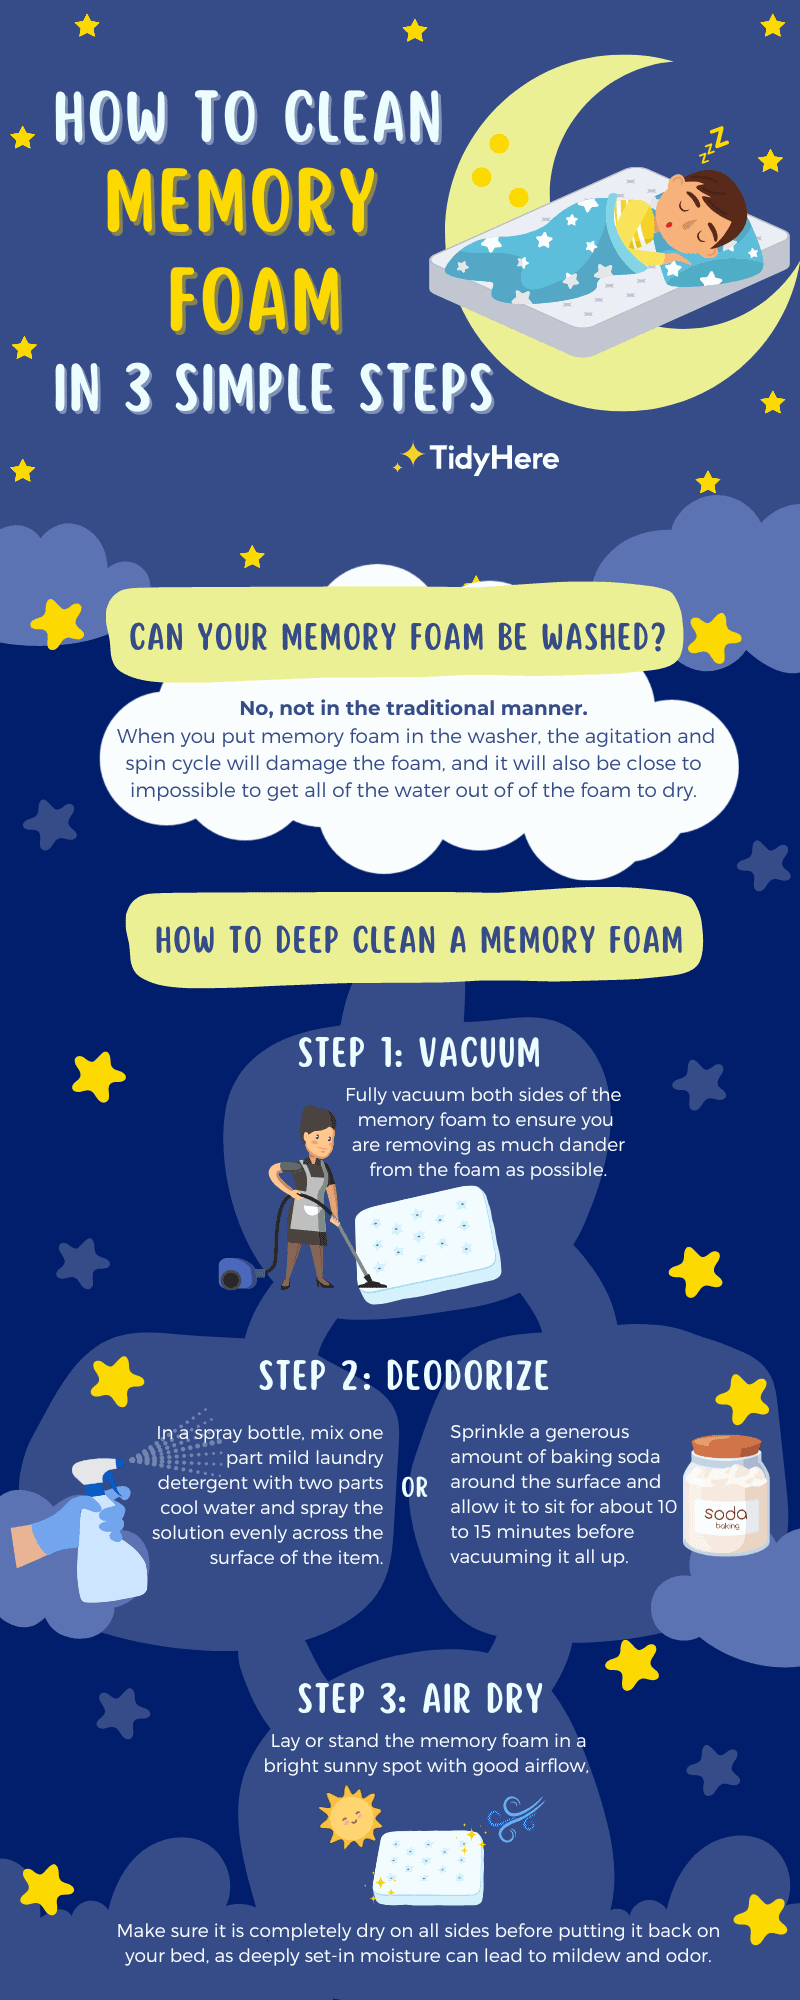 How to Clean Memory Foam Tidyhere Infographic